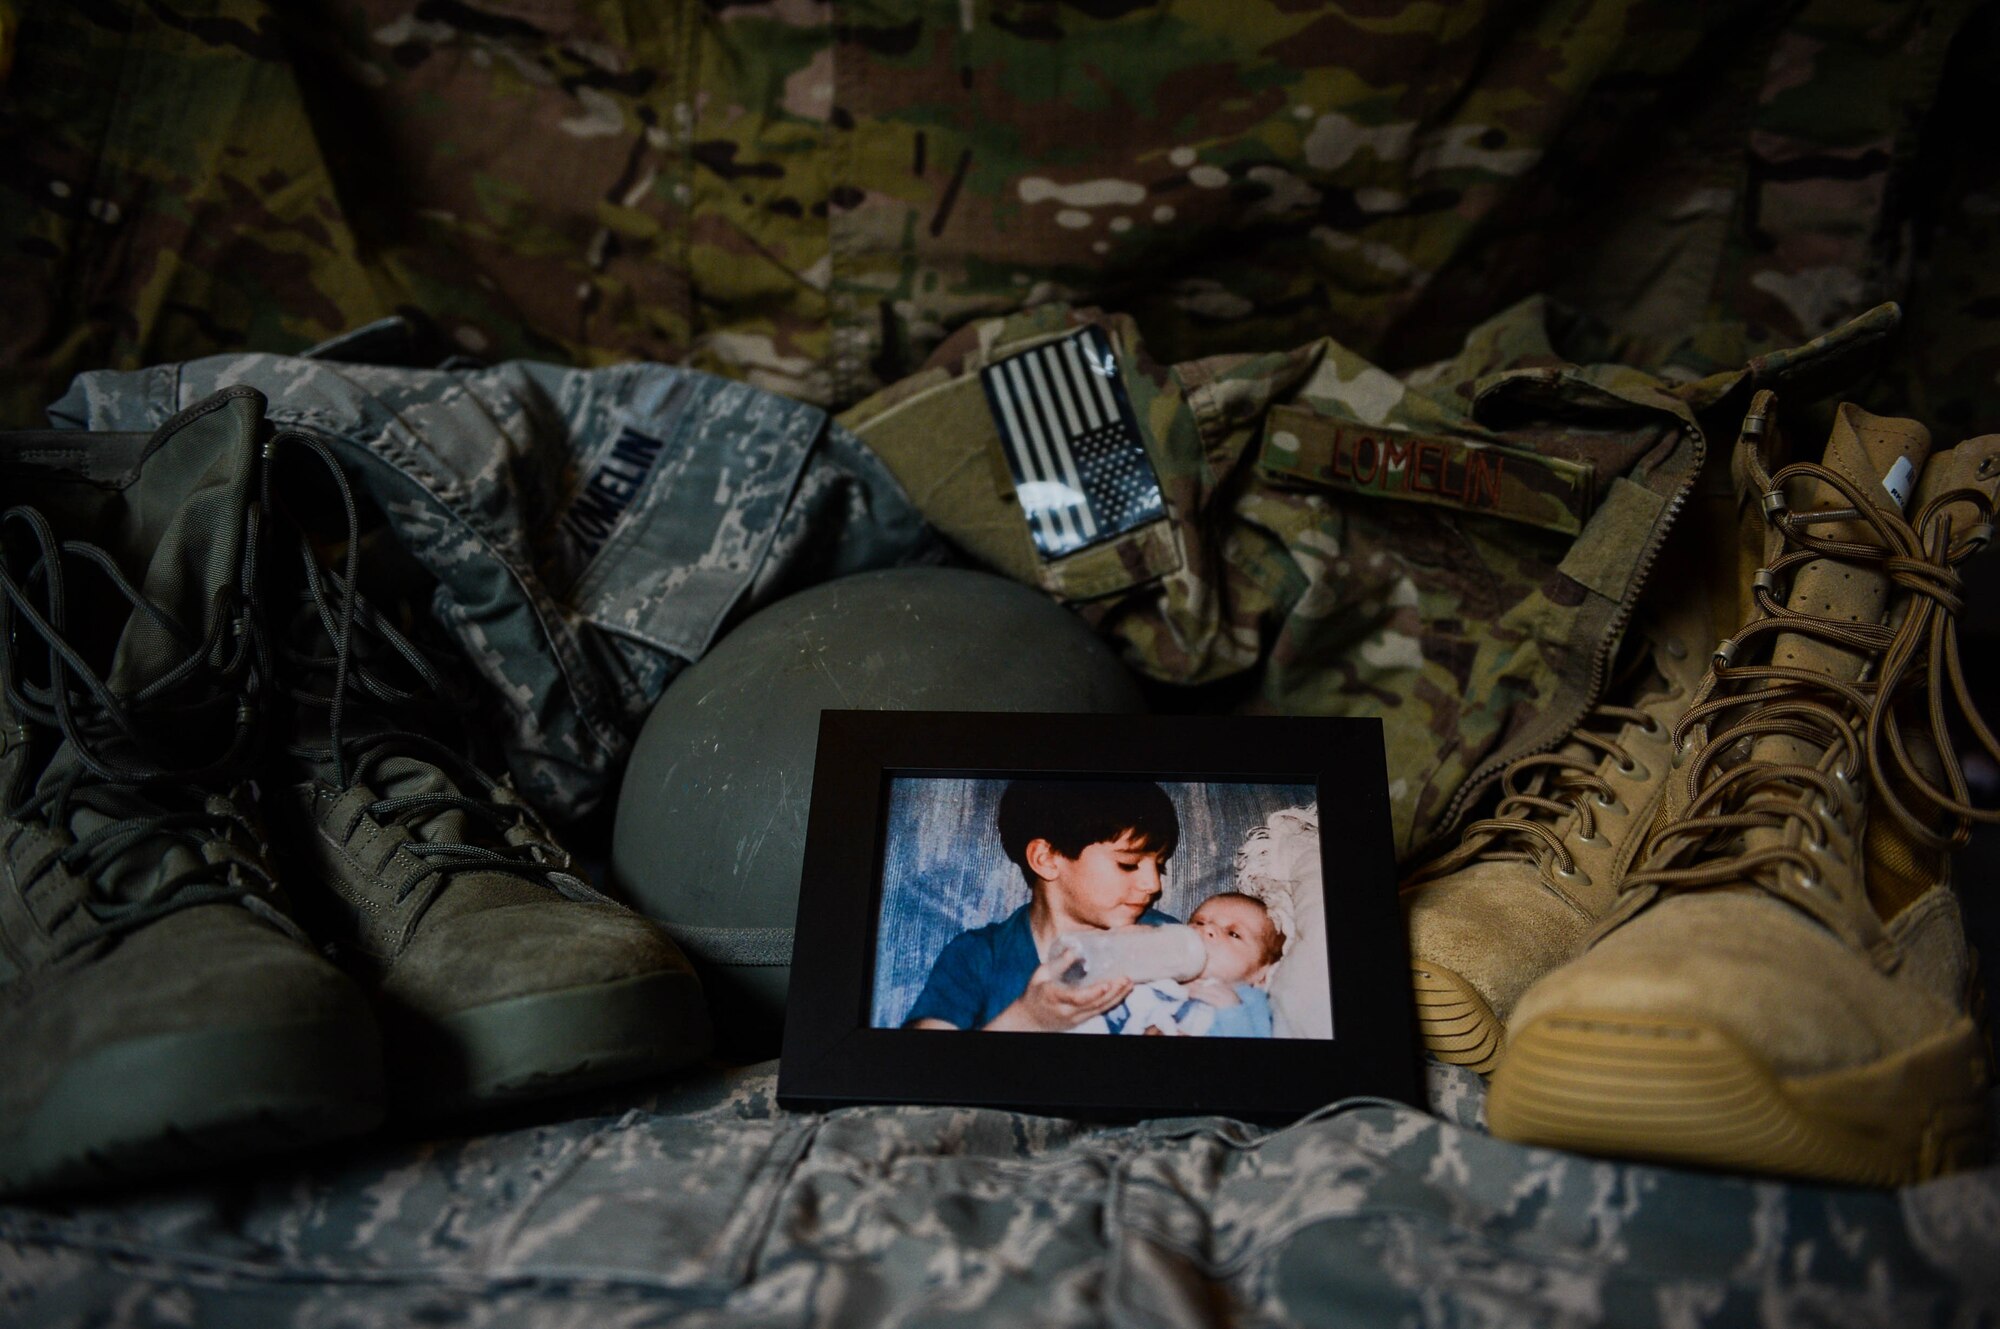 A photograph of U.S. Air Force Senior Airman Edward Lomelin, 606th Air Control Squadron radio frequencies transmission systems technician and native of Austin, Texas, feeding his younger brother U.S. Air Force Airman 1st Class Chris Lomelin, 606th ACS power production technician and native of Austin, Texas, rests on their uniforms at their home in Bitburg, Germany, Sept. 26, 2014. Edward and Chris recently prepared themselves to deploy to Southwest Asia in support of Operation Enduring Freedom. Both brothers are stationed together at Spangdahlem Air Base, Germany, and operate out of the same squadron. (U.S. Air Force photo by Airman 1st Class Kyle Gese/Released)